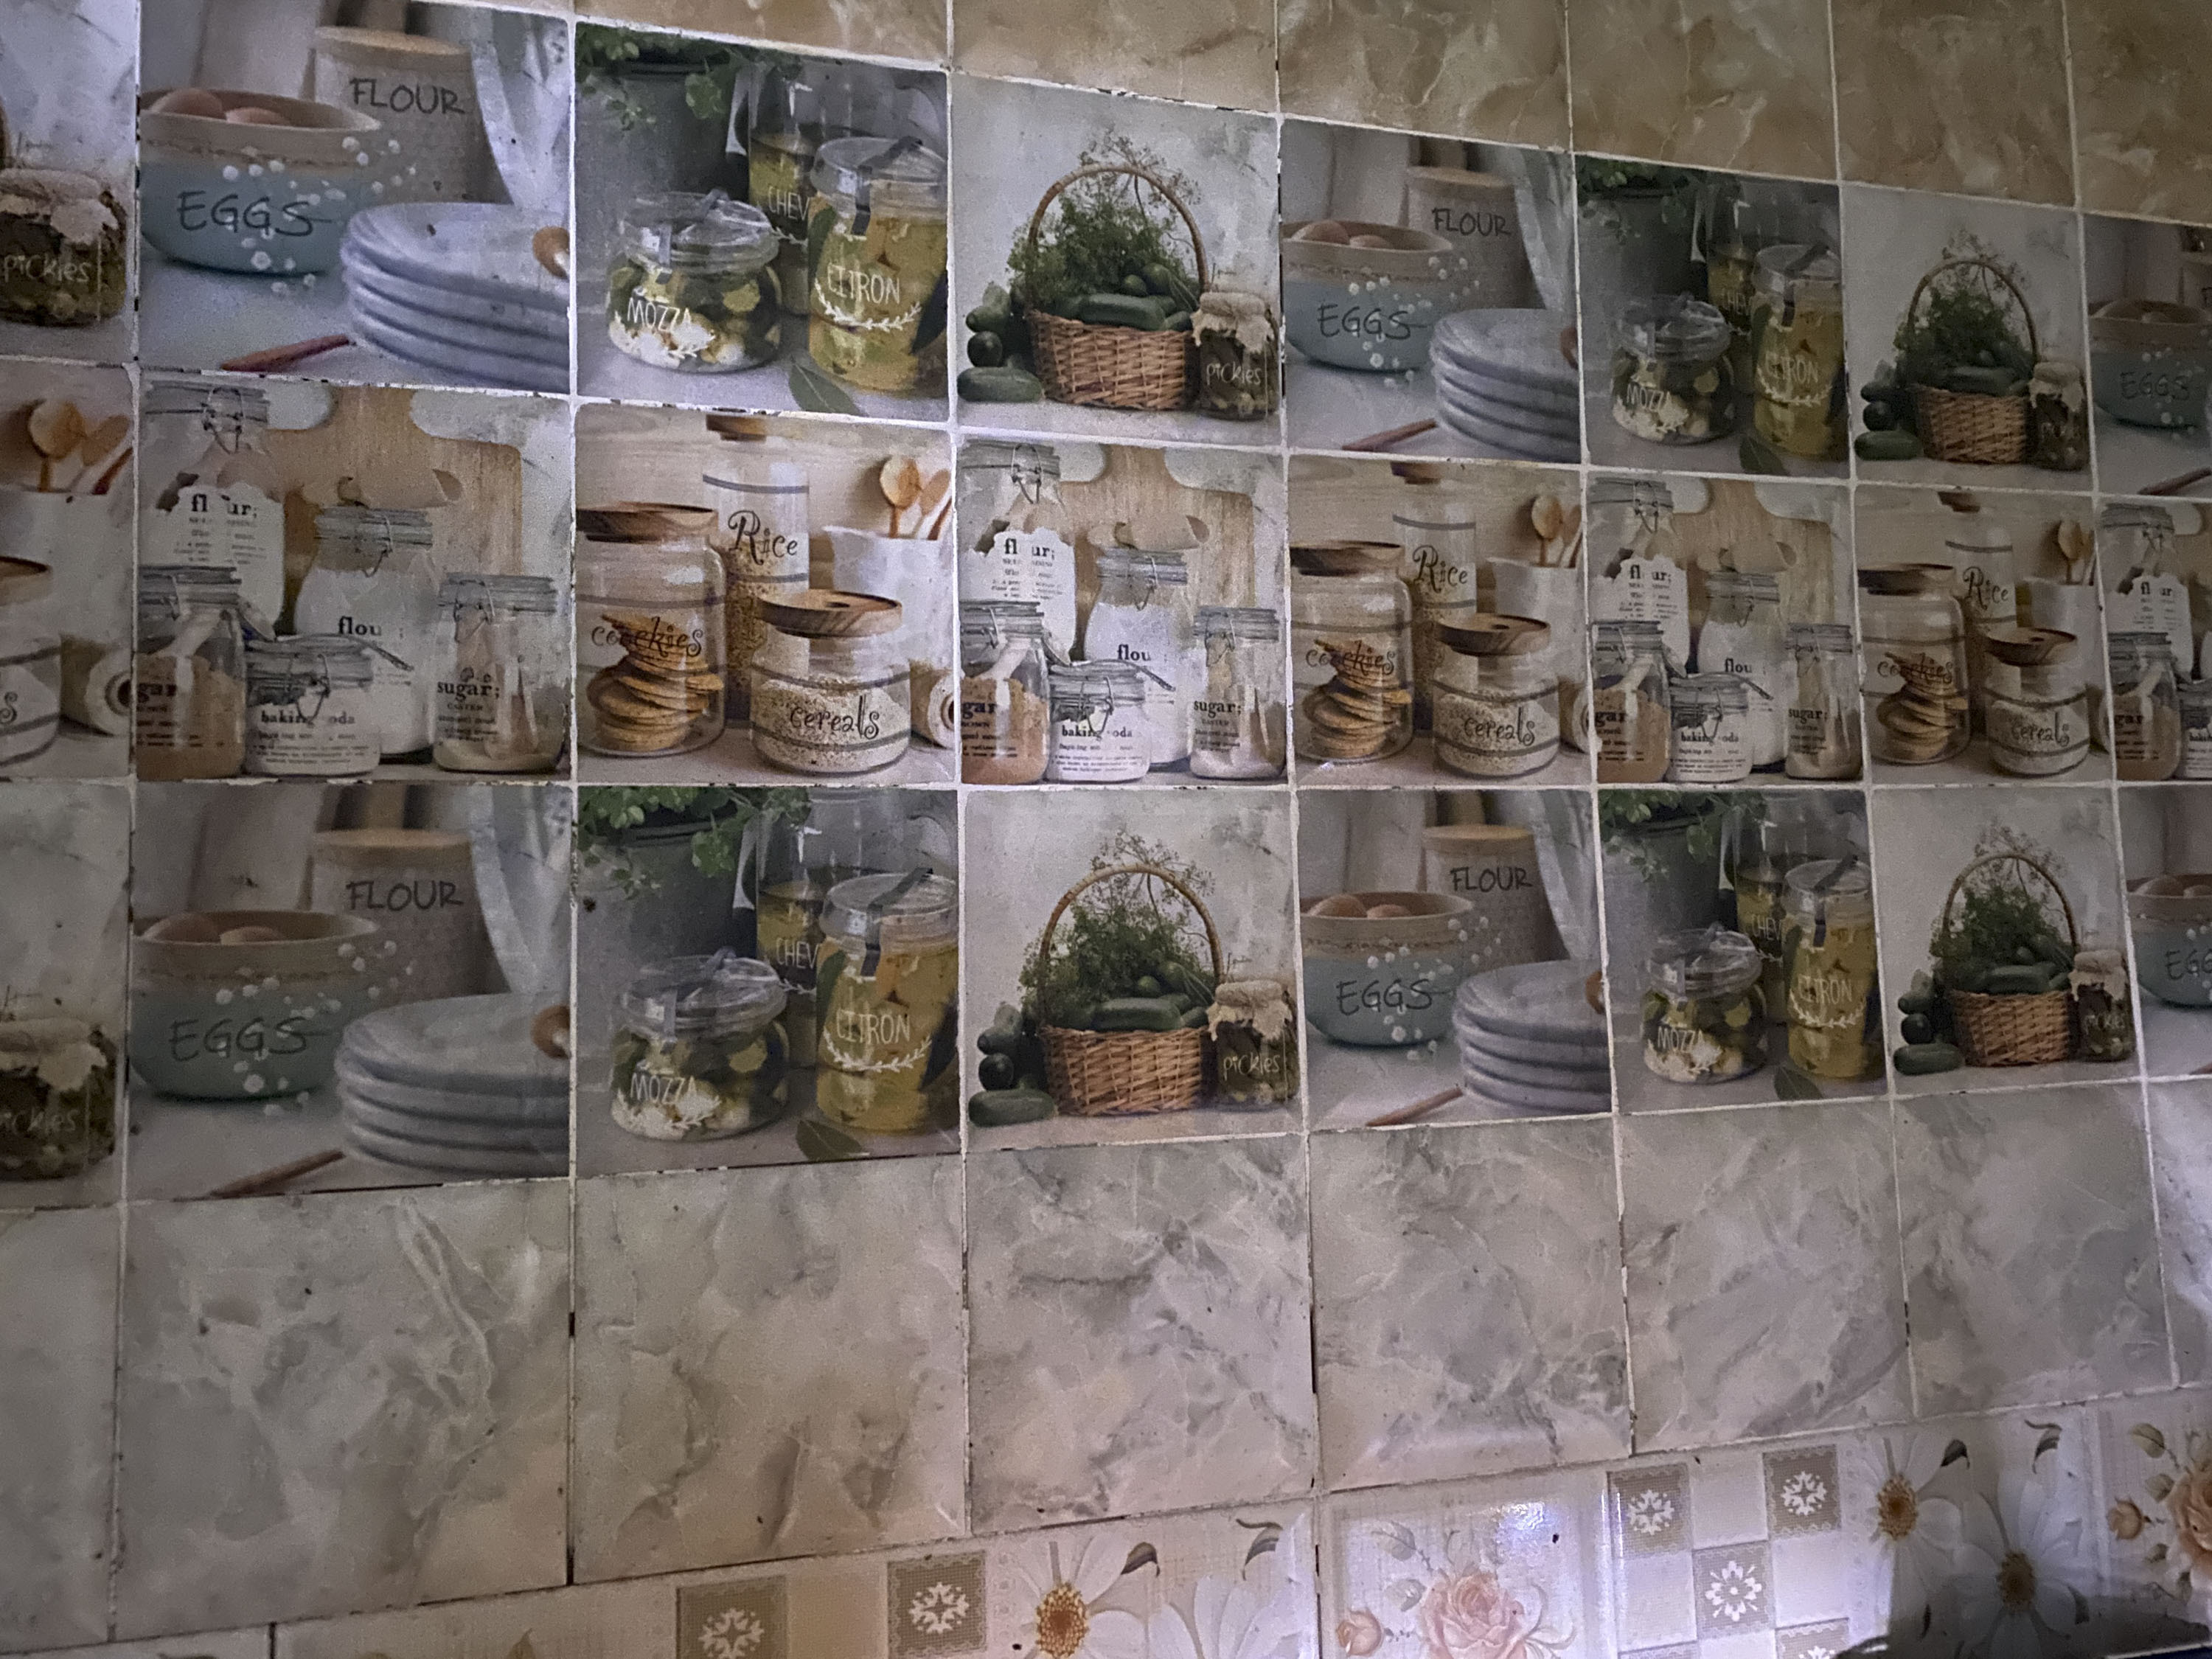 Some thought seems to have been put into the interior design of the compound's facilities, including this kitchen wall. The IDF said that the way the compound was furnished was a sign that the compound was used by Hamas leaders.